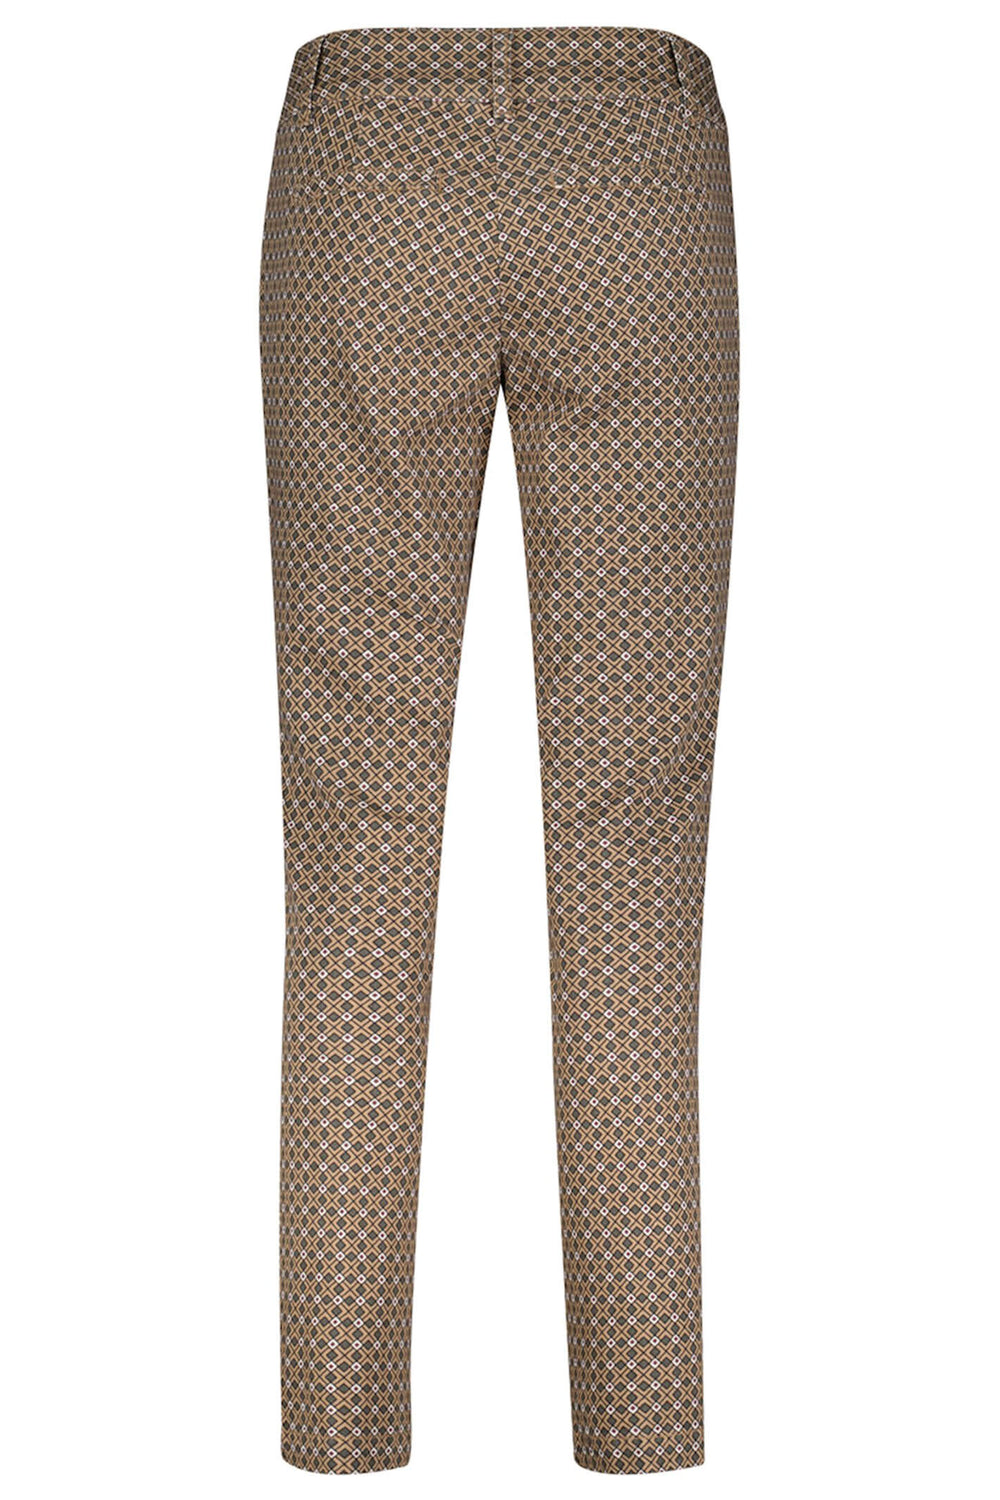 Red Button SRB4129 Diana Brown Green Fancy Print Trousers - Olivia Grace Fashion